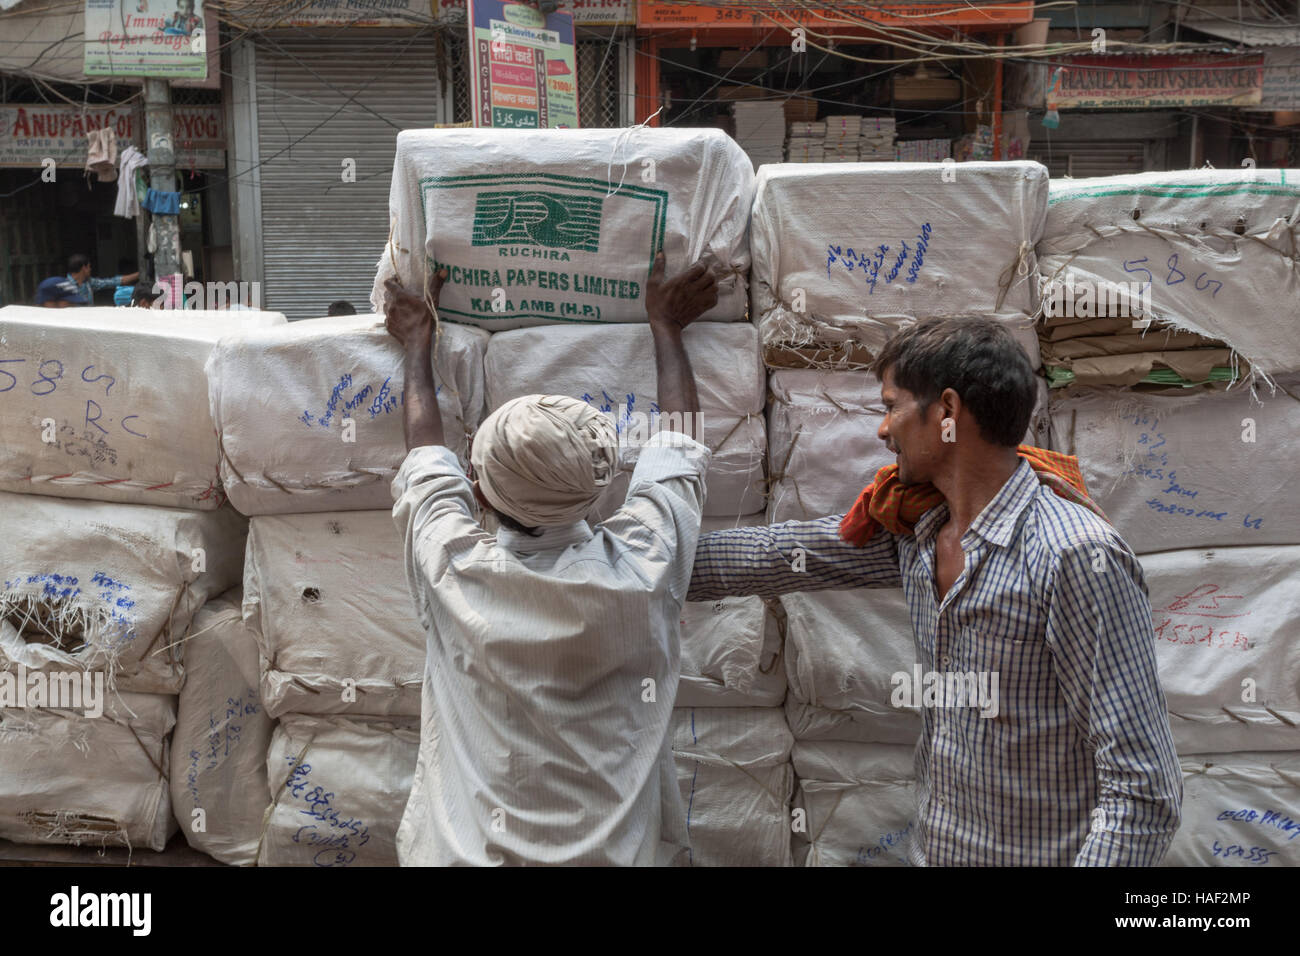 Men loading wrapped goods (unknown) onto a barrow or wagon, Old Delhi, India Stock Photo